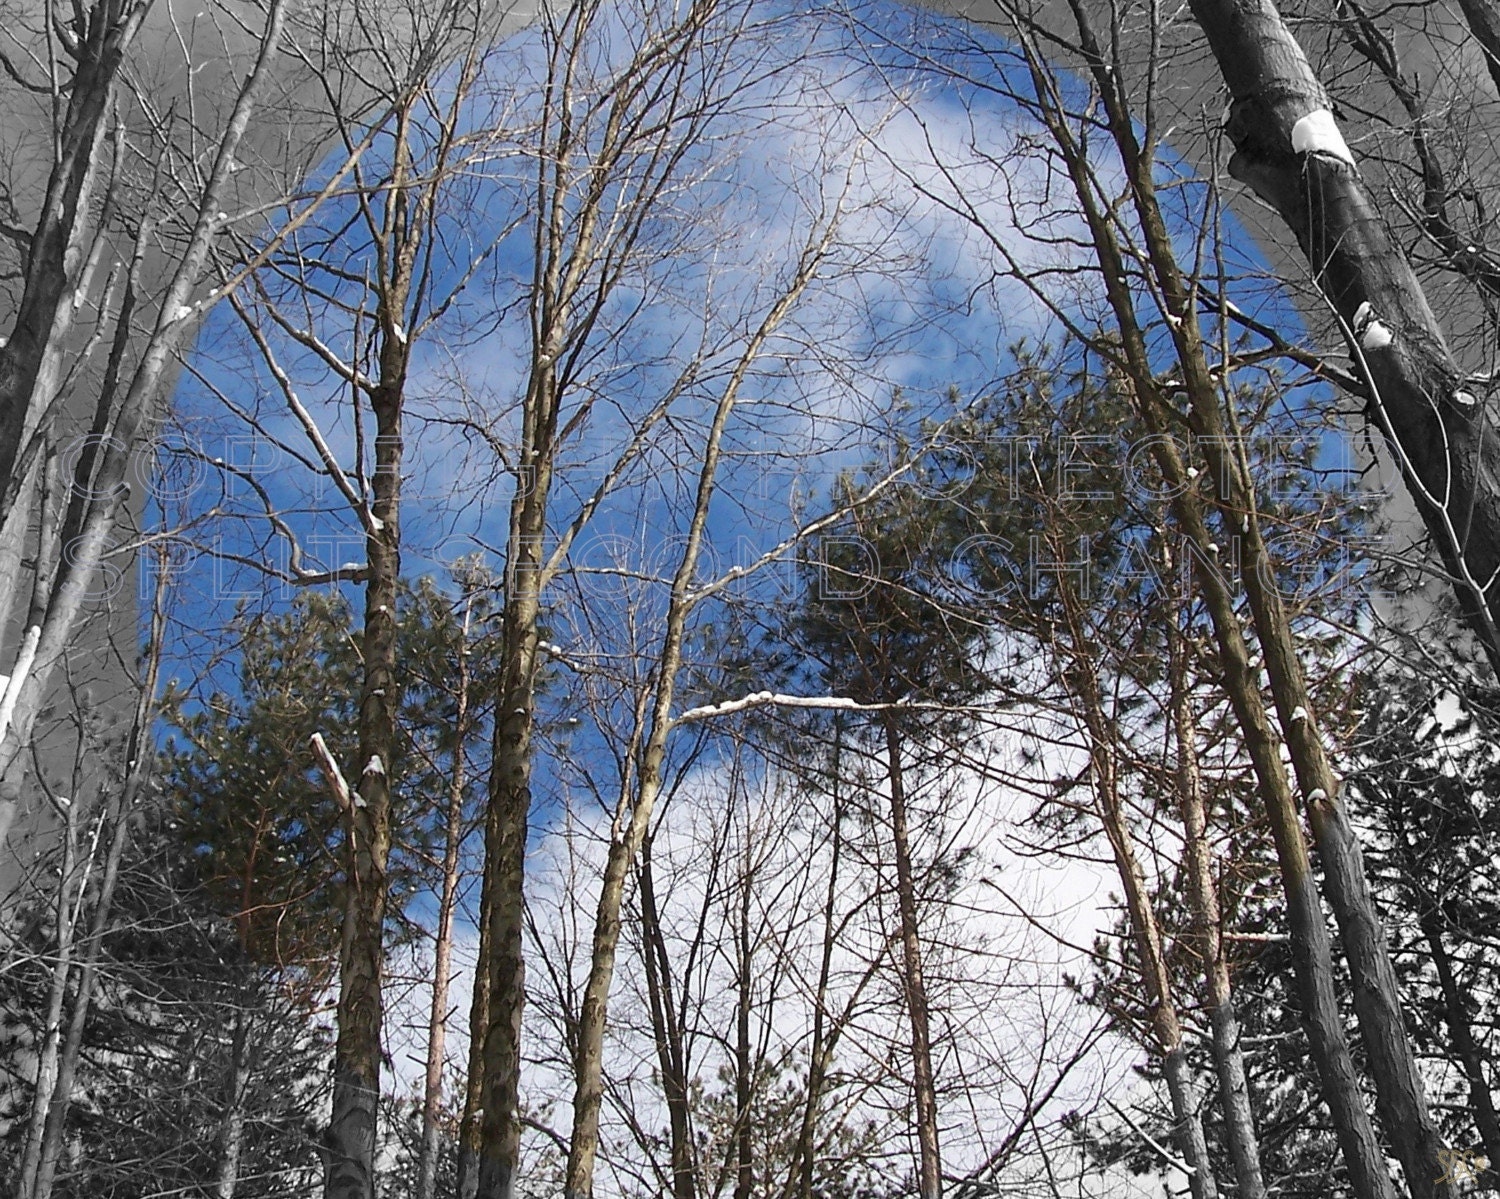 ALLEGHENY NATIONAL FOREST........WINTER SKIES........ 8x10 PHOTOGRAPH